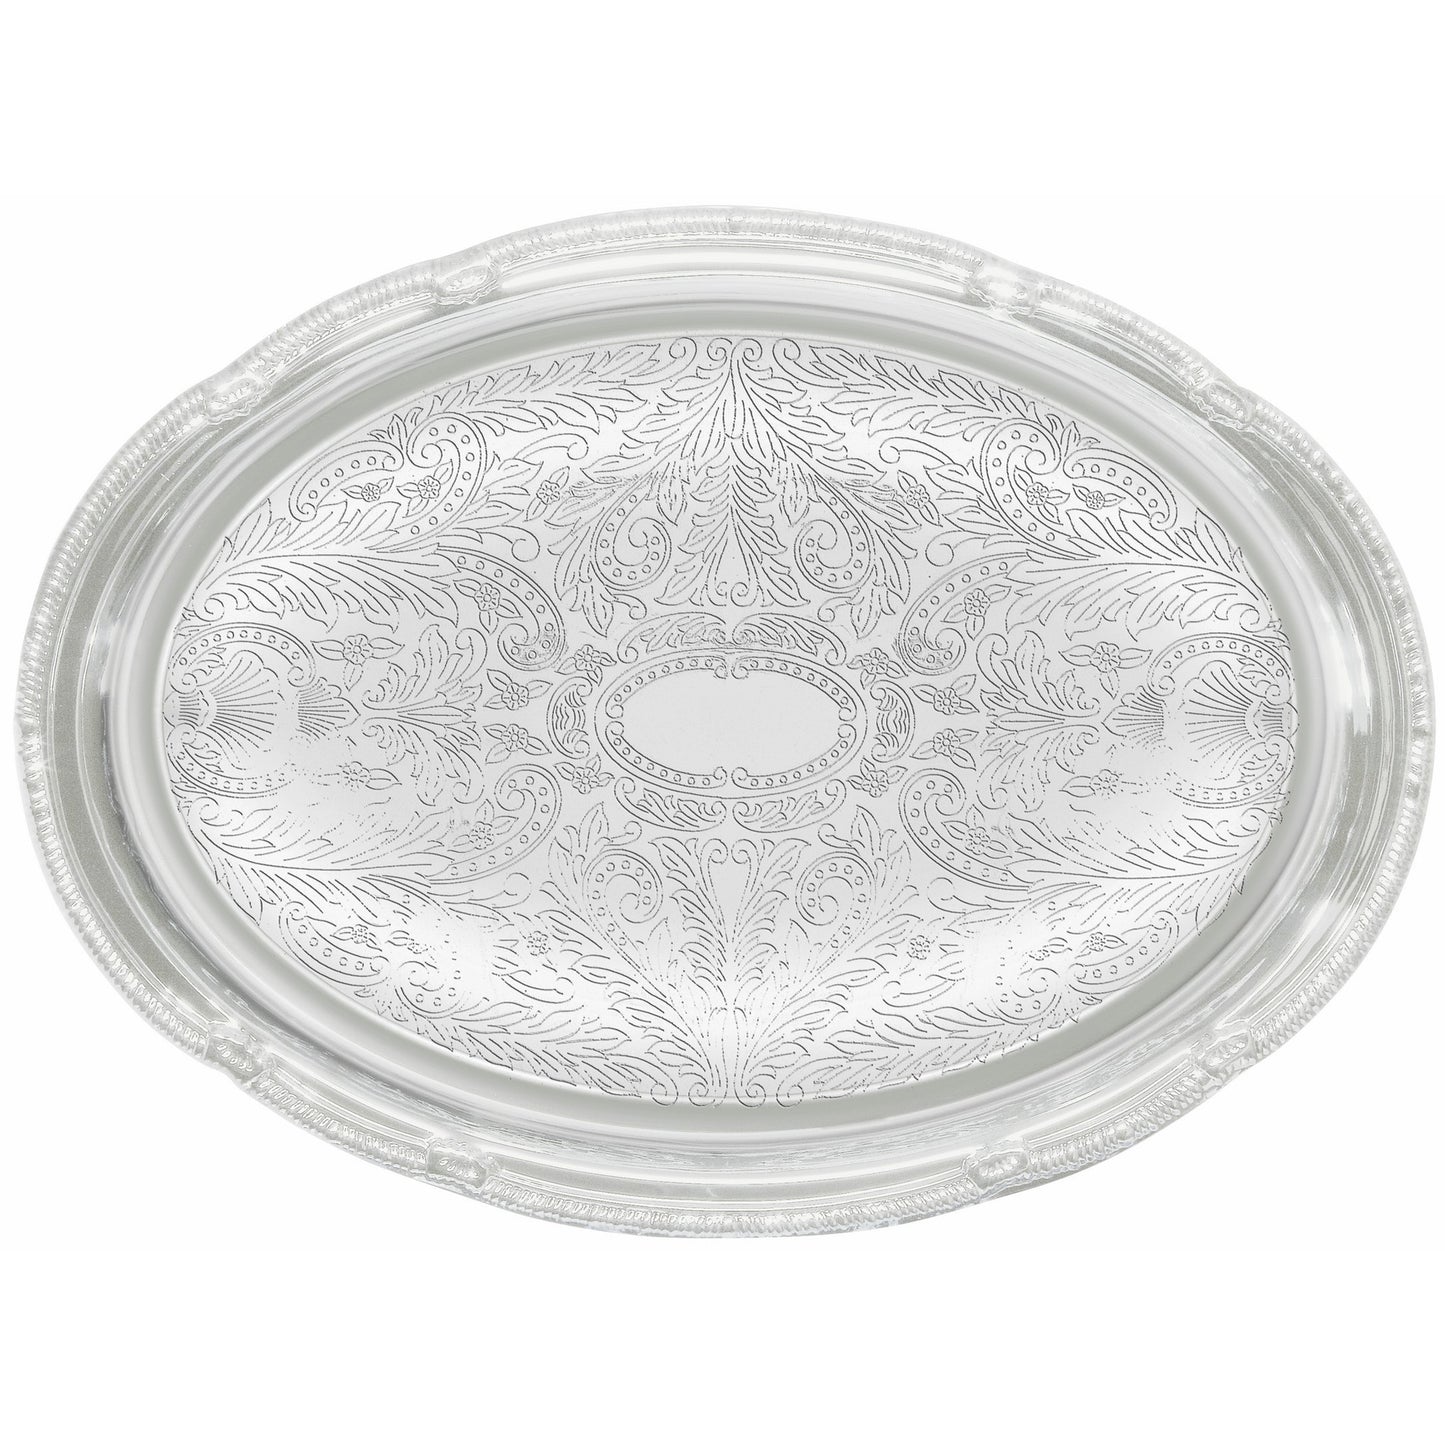 CMT-1318 - Chrome-Plated Serving Tray - Oval, 18-3/4 x 13